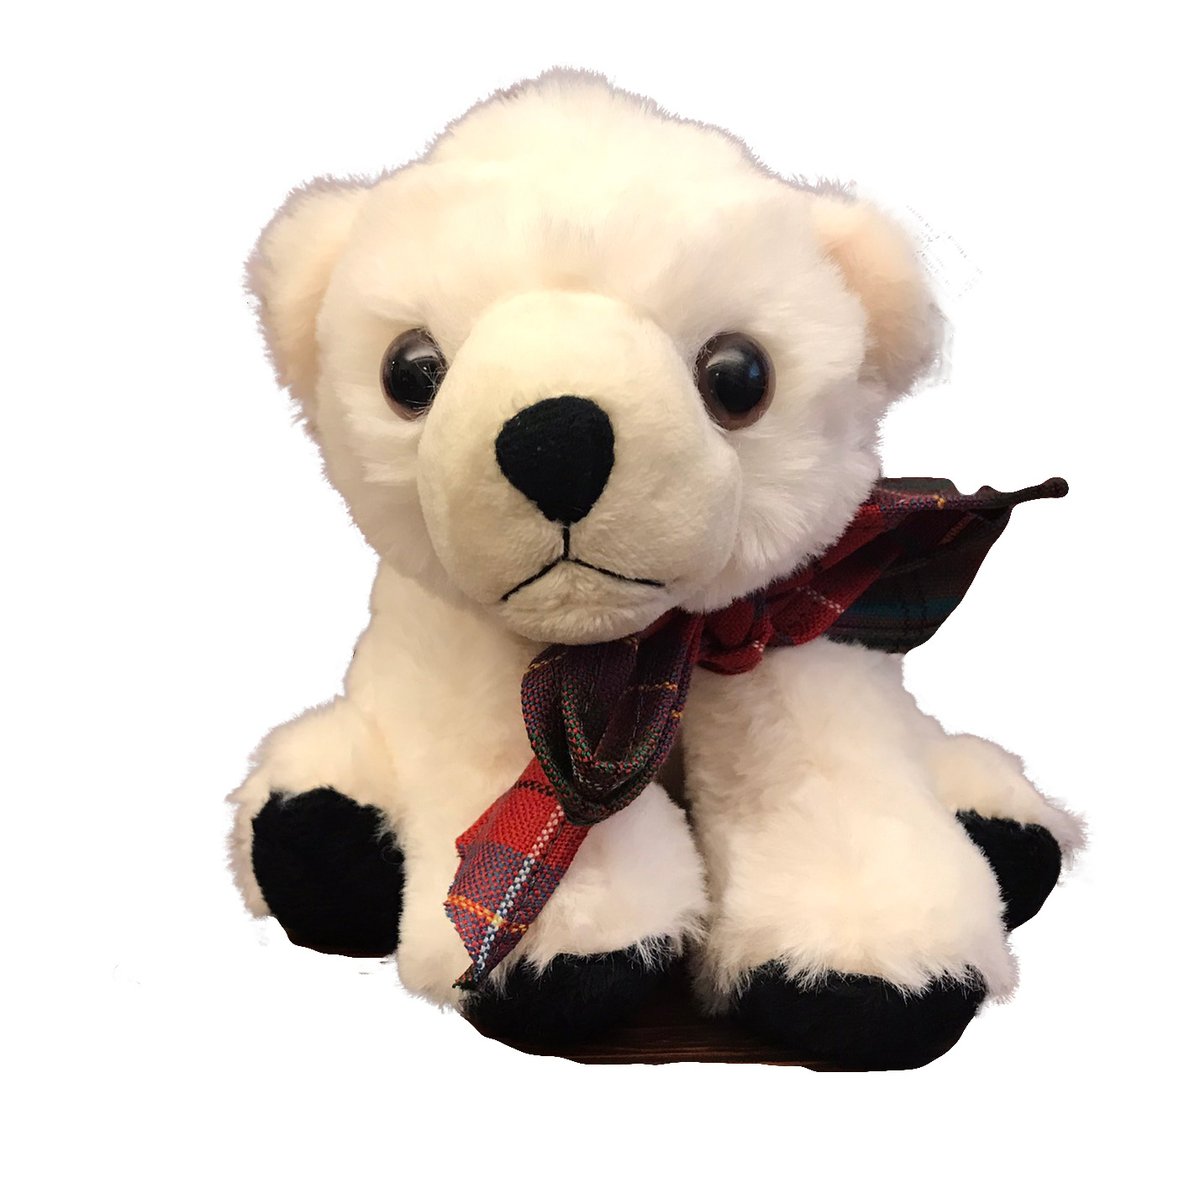 OTD in 2006, the Kermode bear, also known as the spirit bear, became BC's mammal emblem under the Provincial Symbols and Honours Act. Visit the #BCLeg Gift Shop to find your own little spirit bear! bcleg.ca/giftshop.